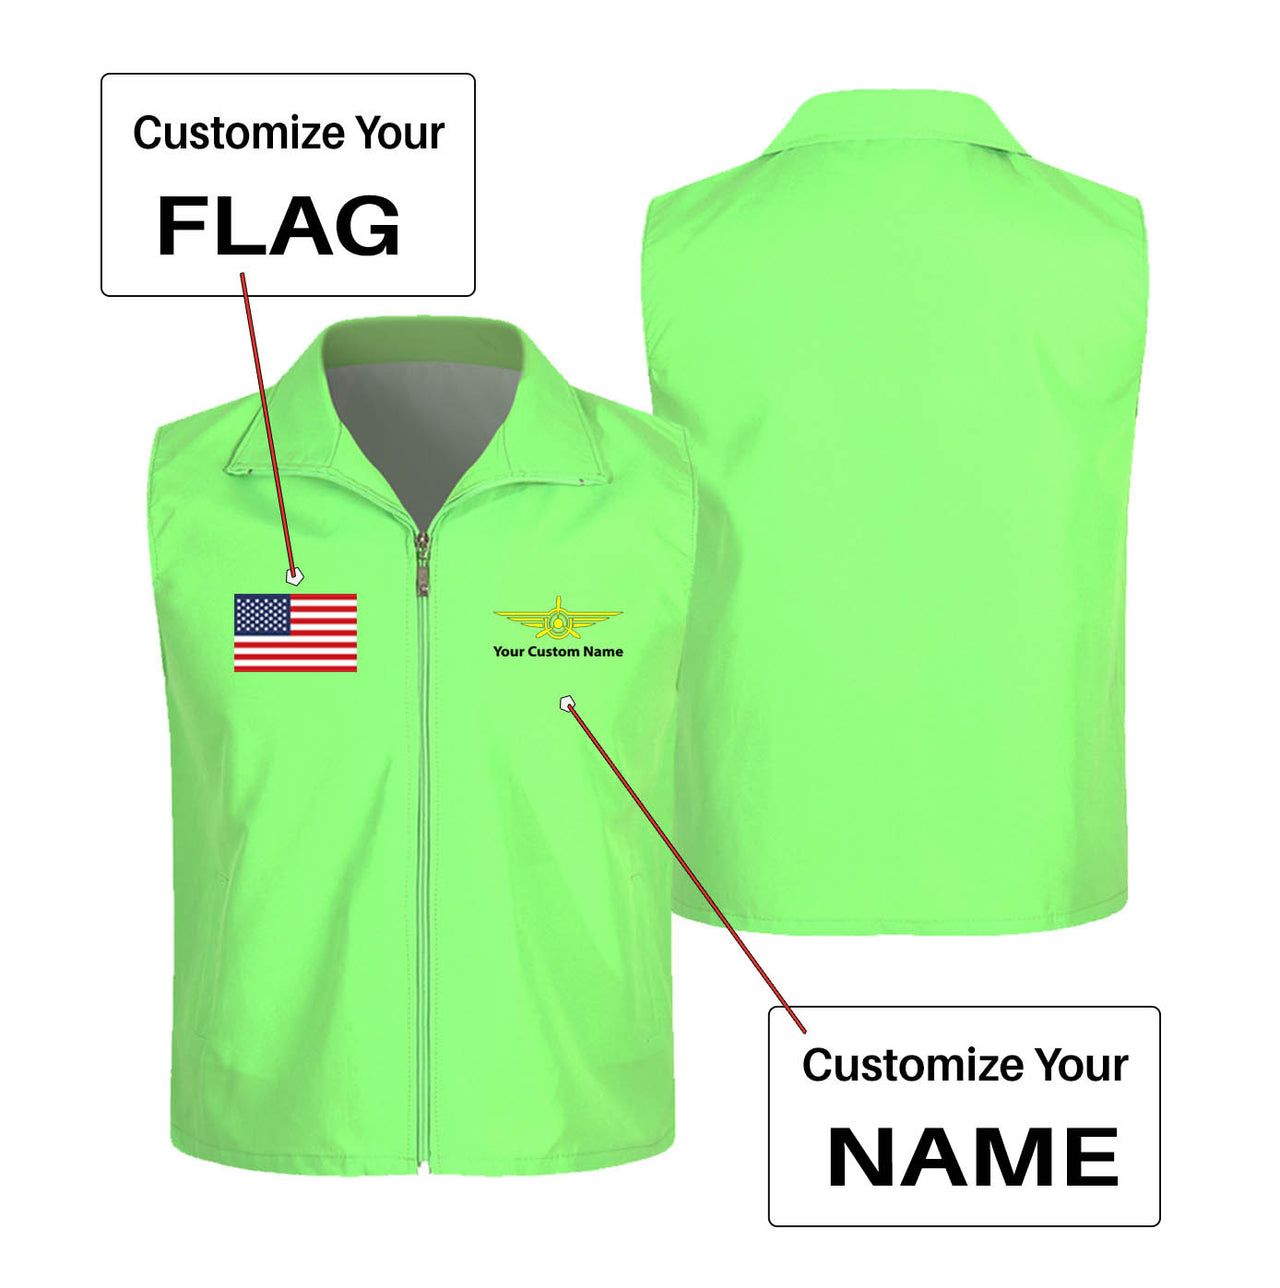 Custom Flag & Name with "Badge 3" Designed Thin Style Vests